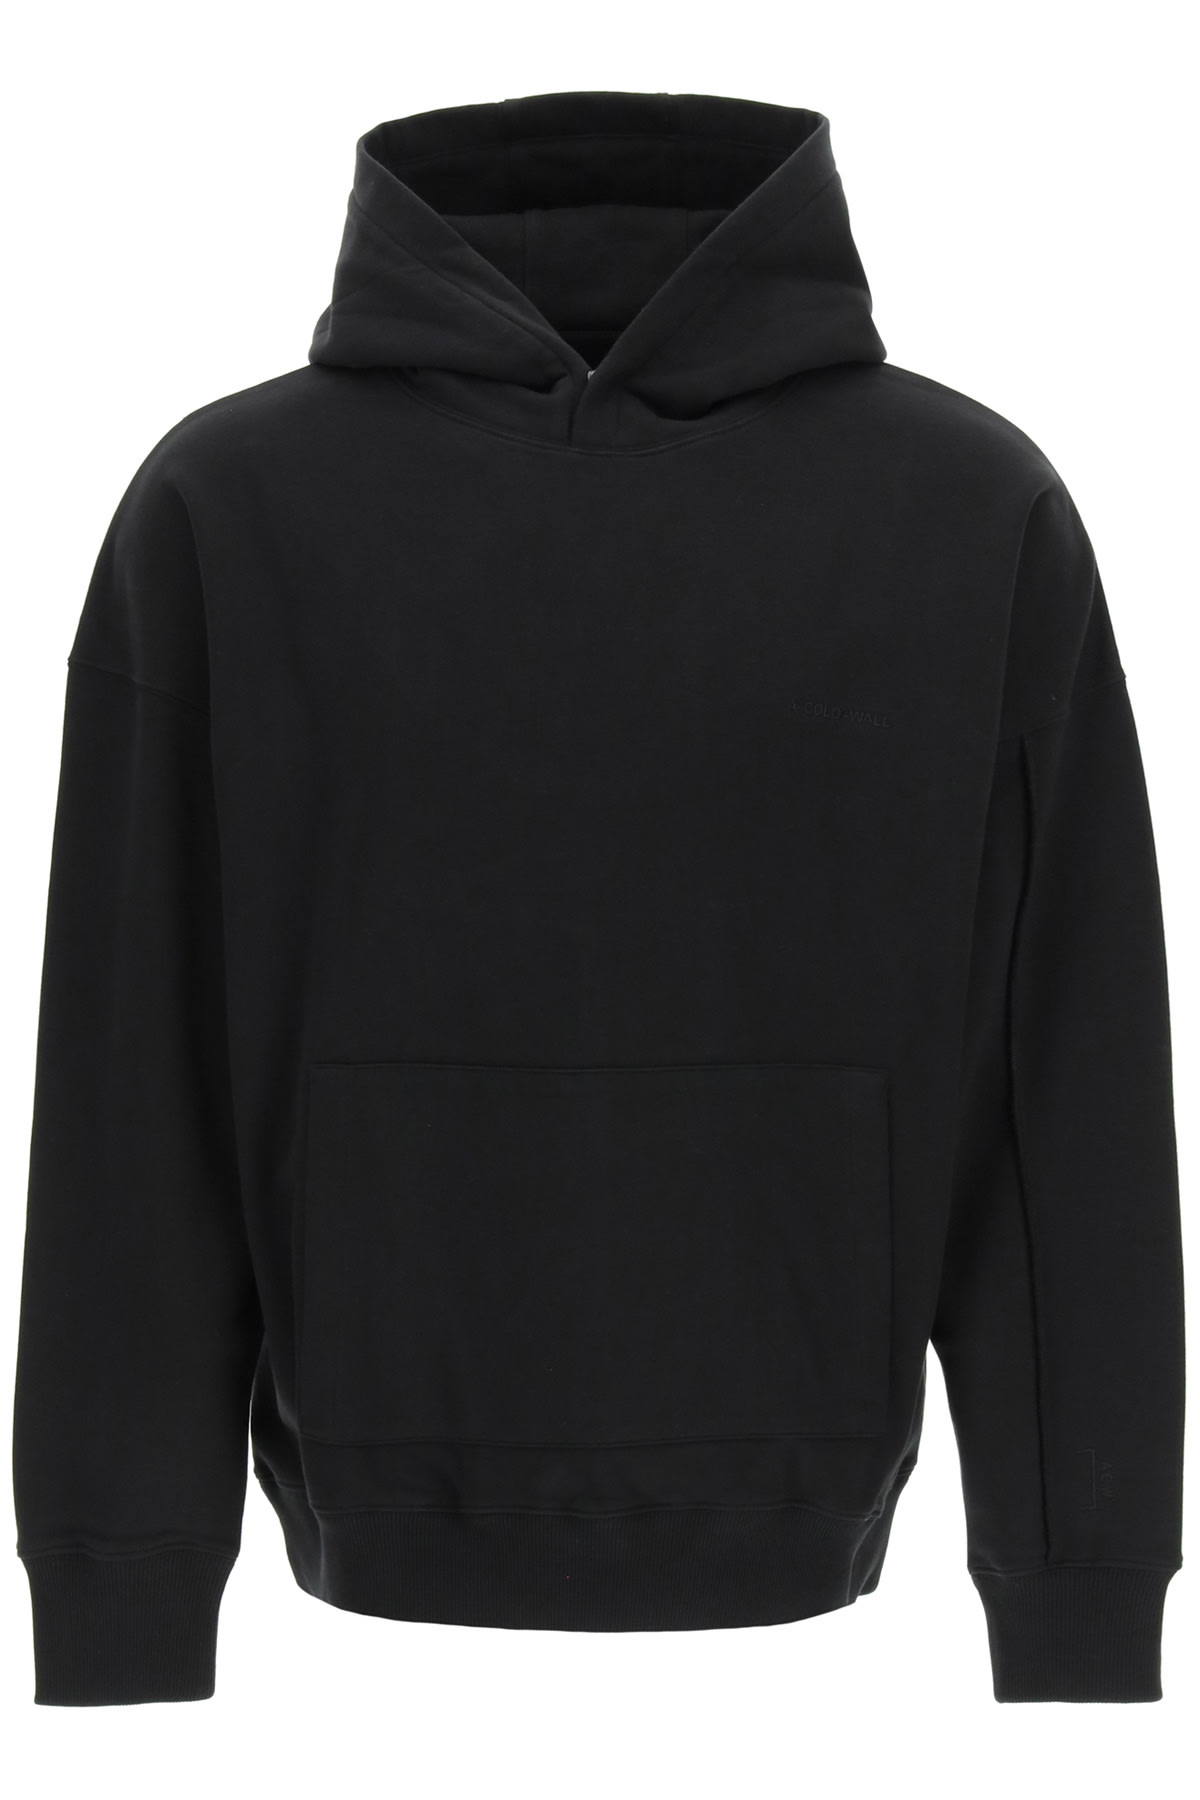 A-COLD-WALL* HOODIE WITH LOGO EMBROIDERY,ACWMW030 BLACK